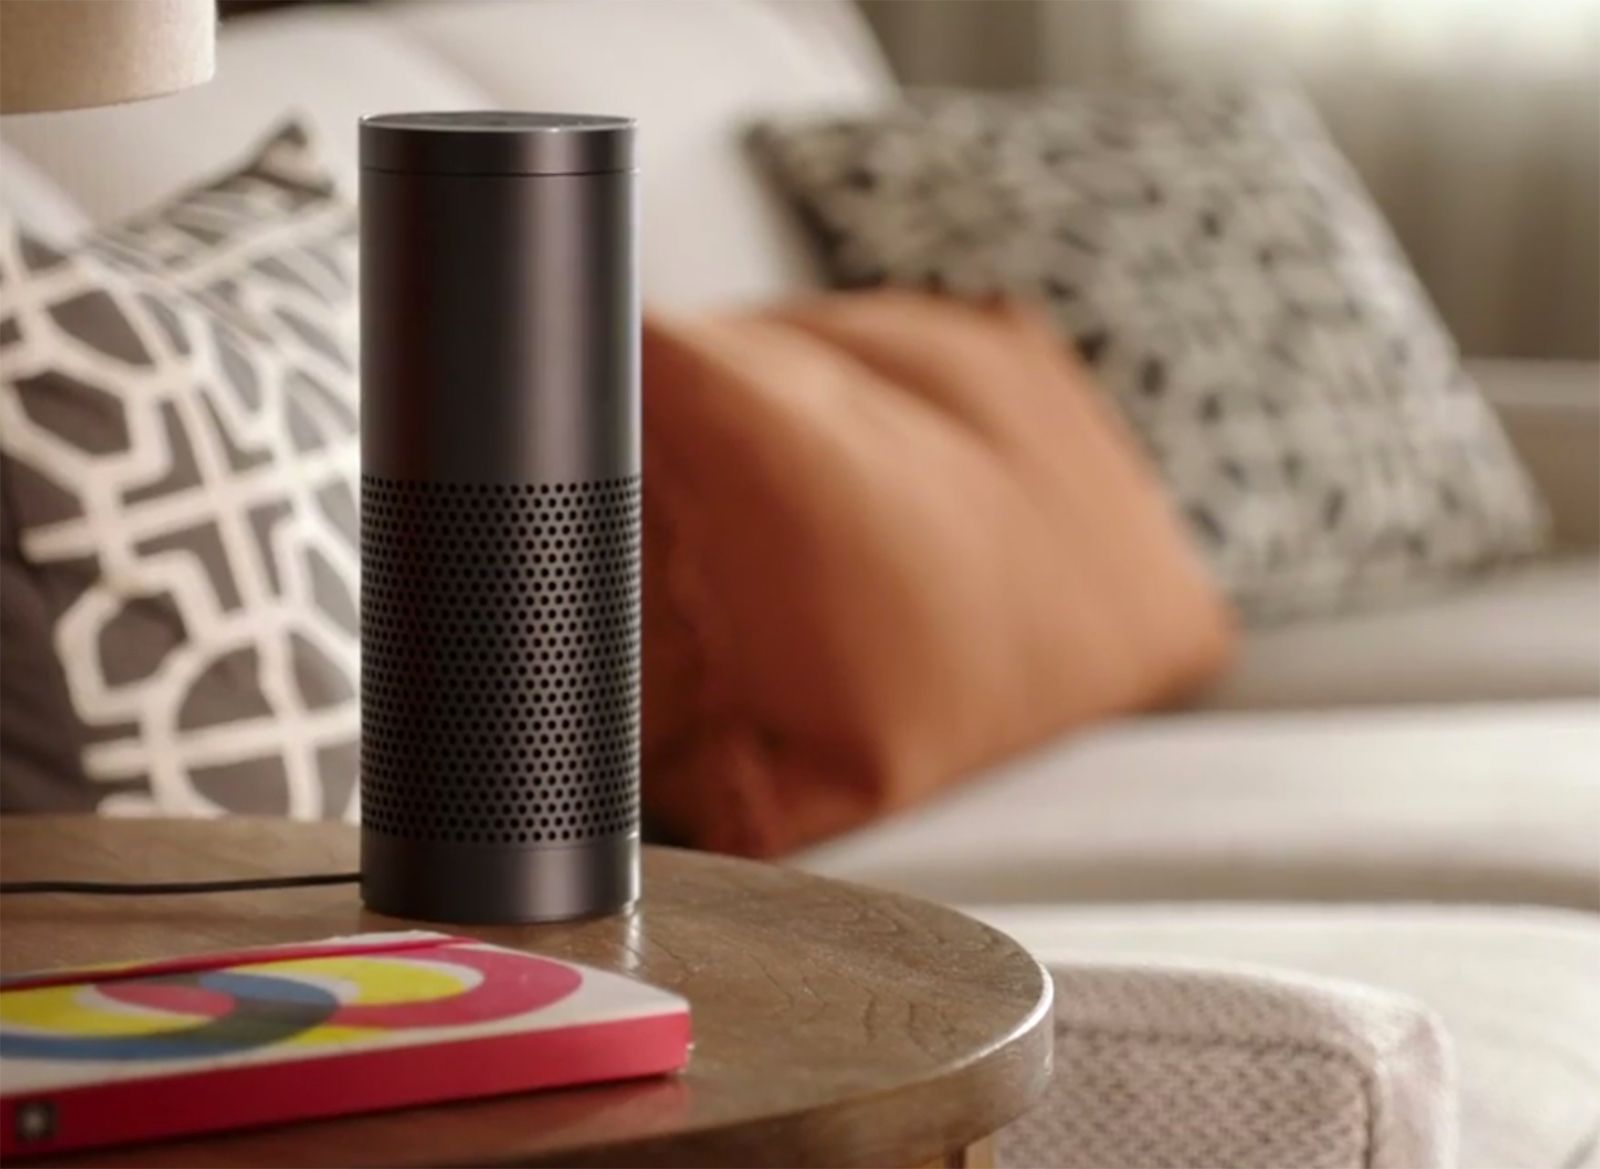 alexa the brains behind amazon echo wants to take over all your connected devices image 1